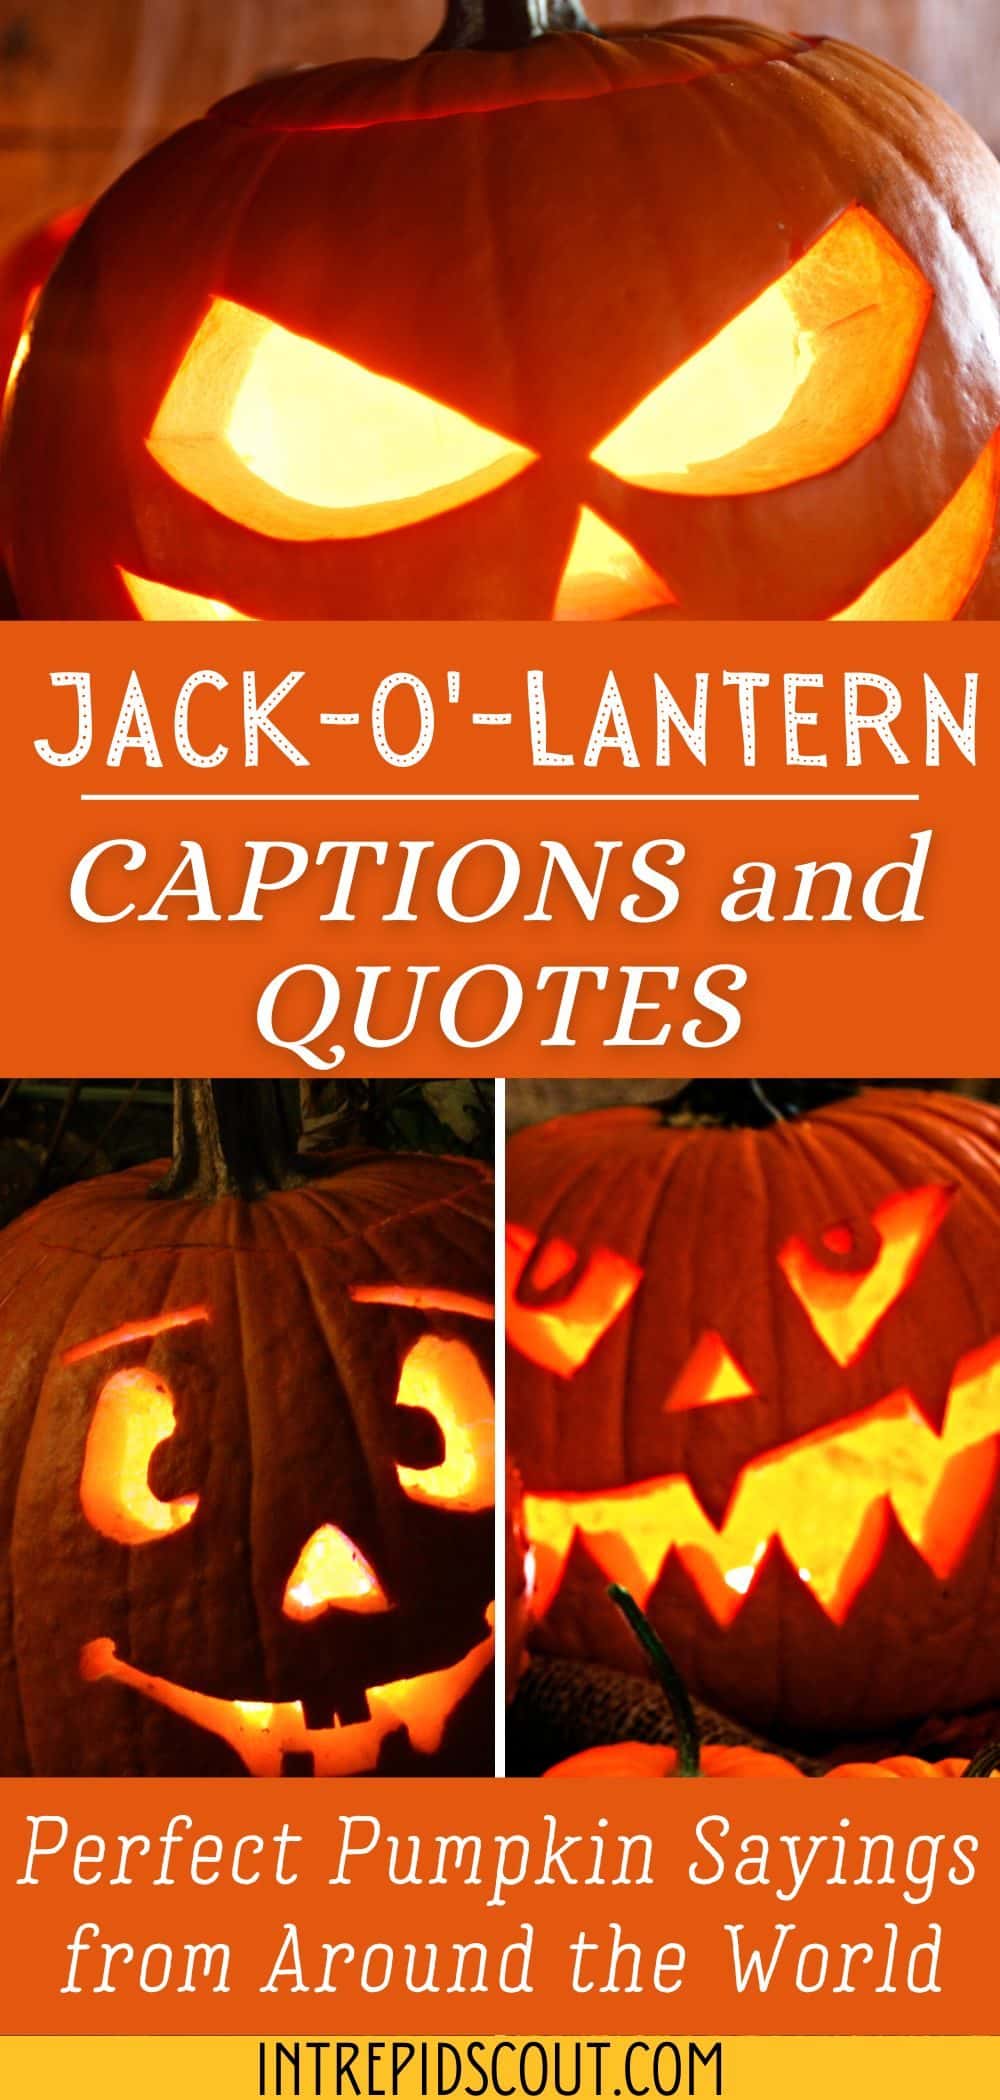 Jack-o'-lantern captions and quotes